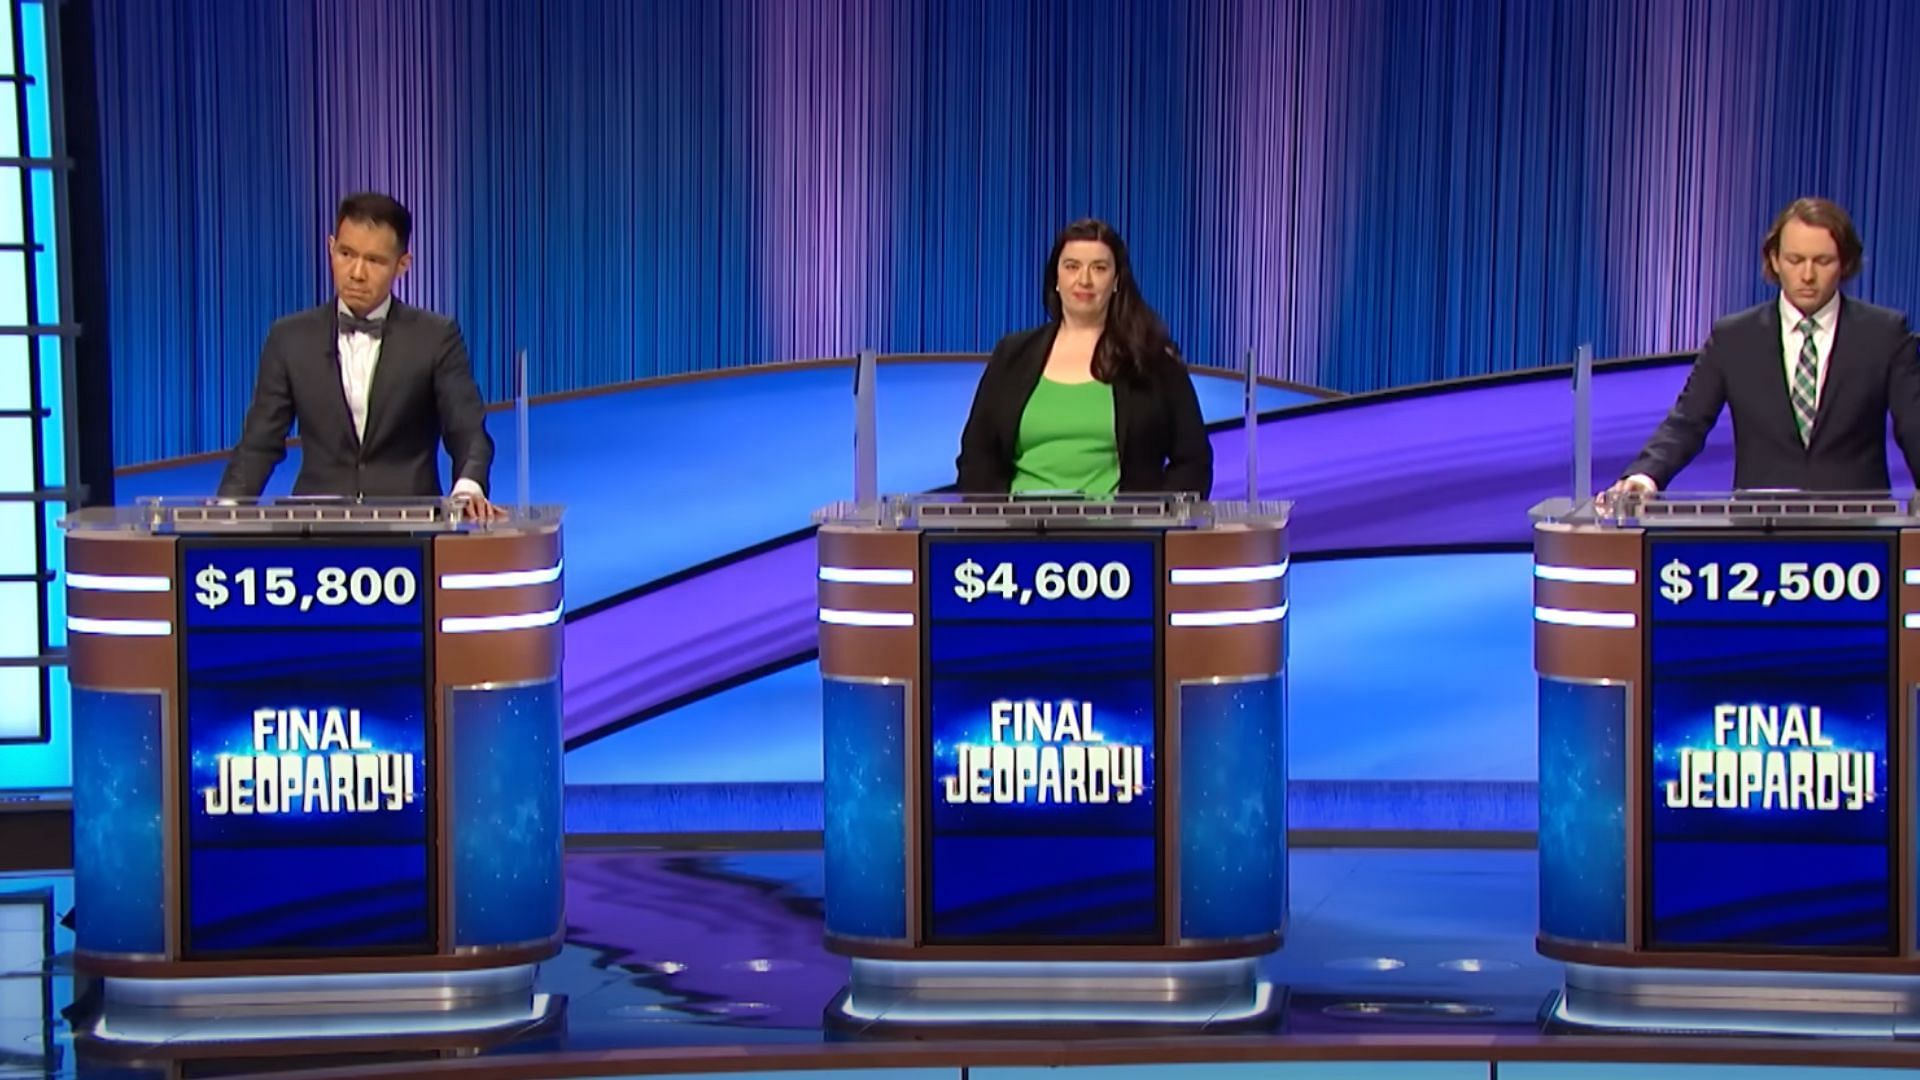 The game show aired a new episode on July 5, 2022 (Image via Jeopardy!)